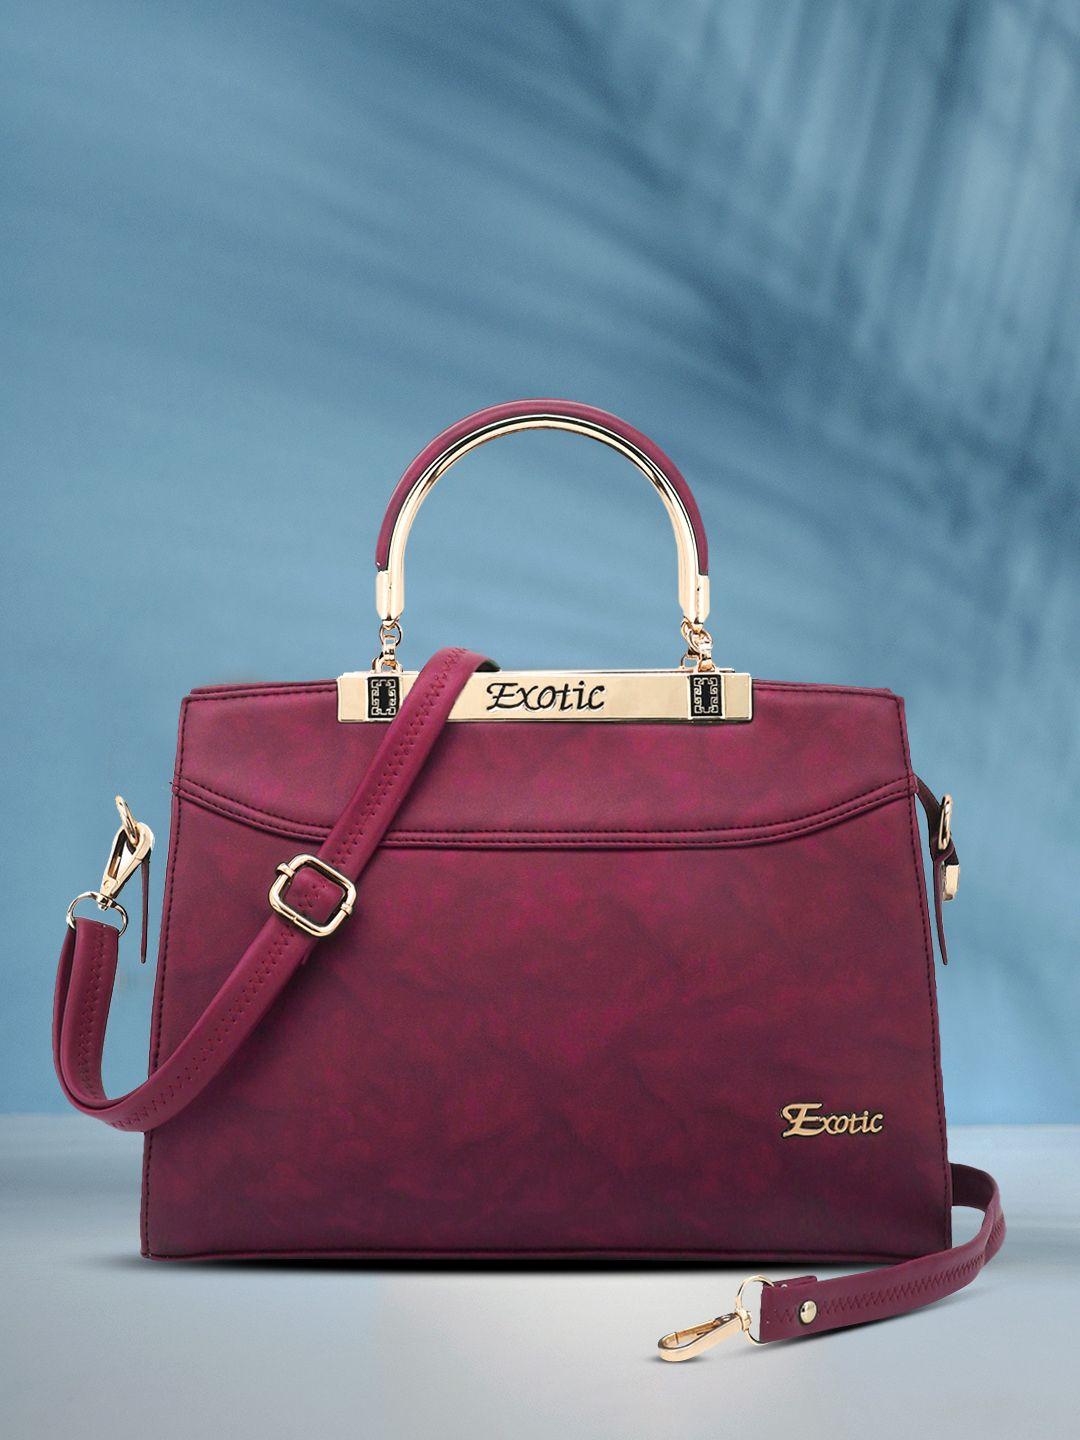 exotic purple structured handheld bag with detachable sling strap